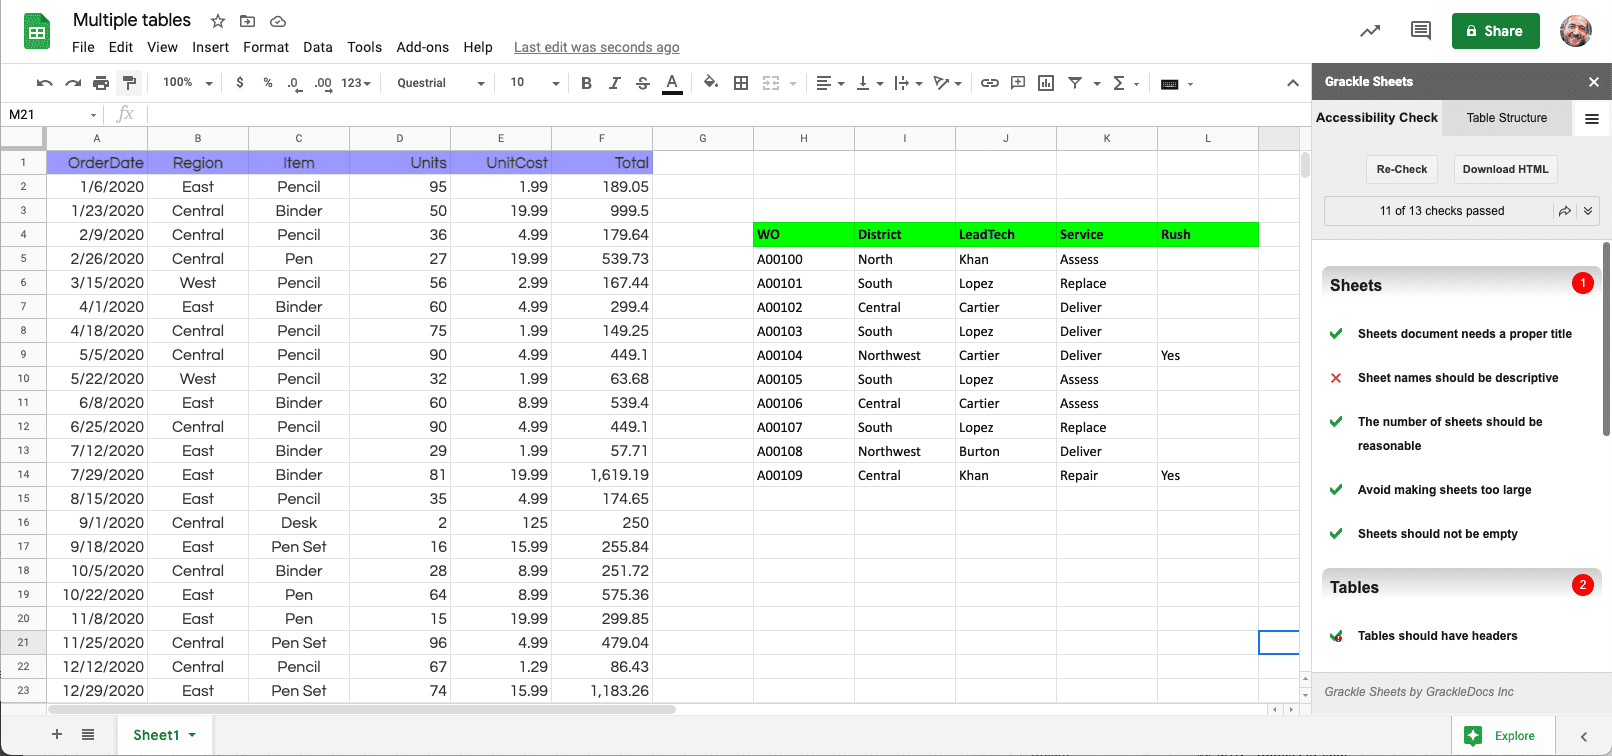 Screenshot of Grackle Sheets showing data tables